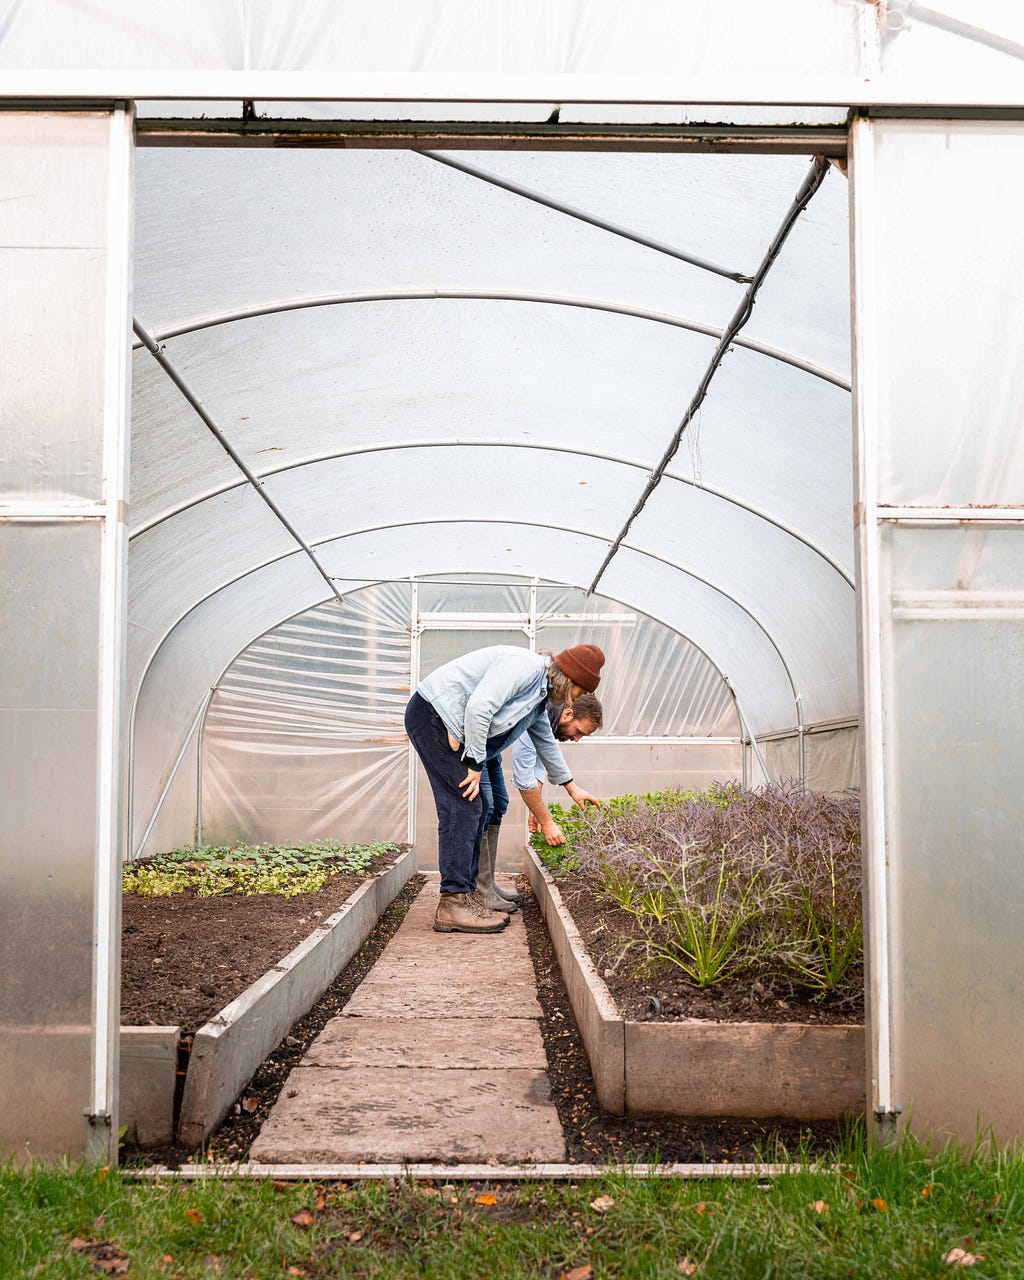 Handpicking fresh produce in a greenhouse garden ready for restaurant dishes, photographed by Food Story Media digital agency